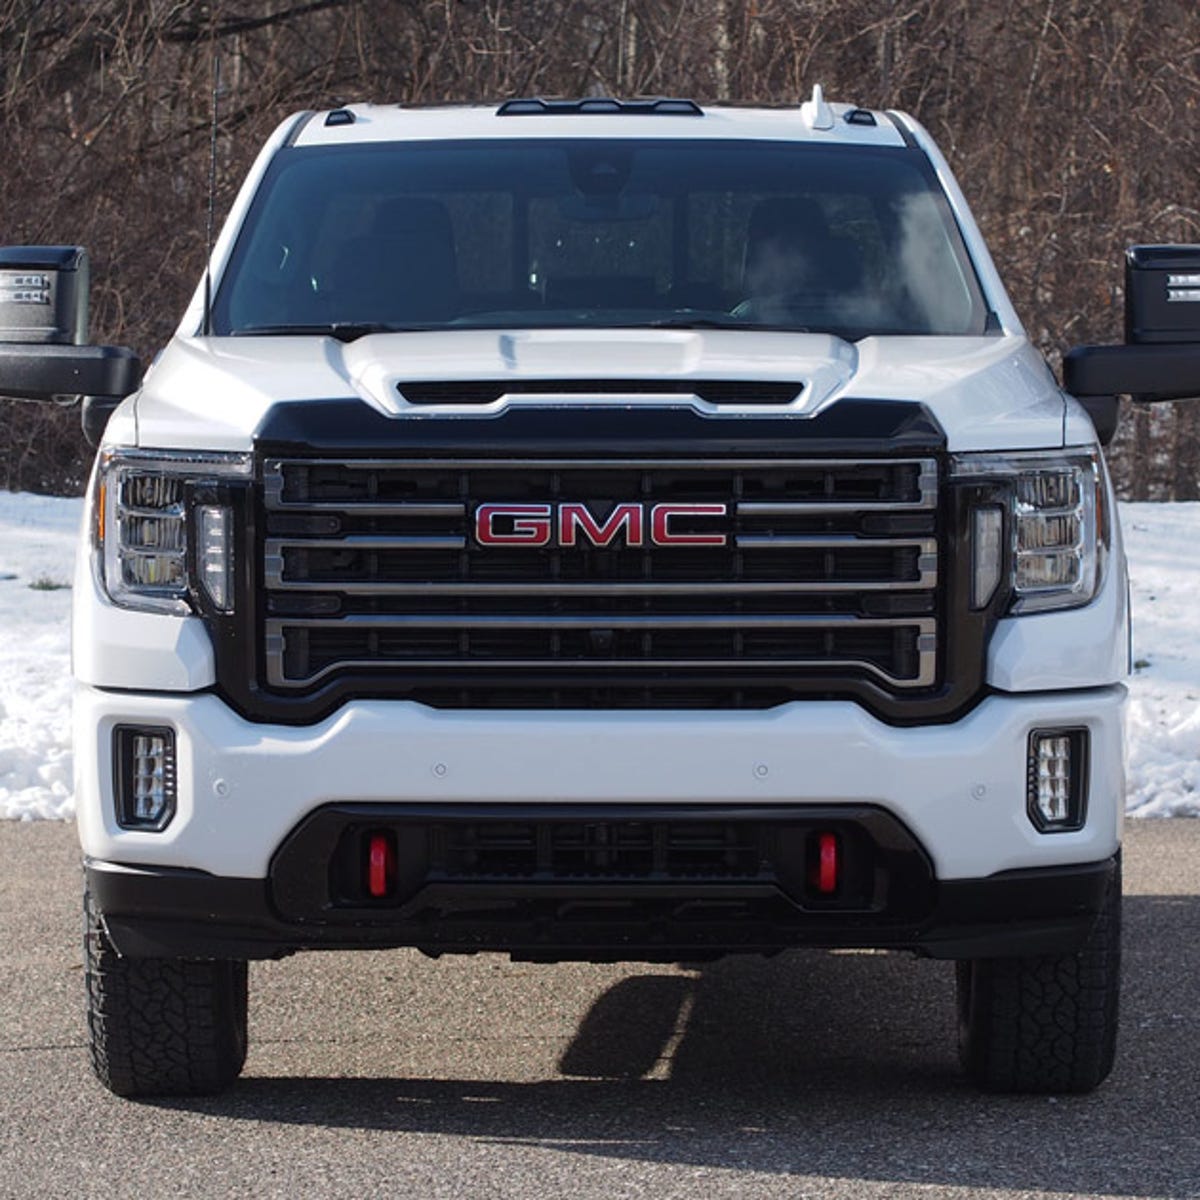 2022 GMC Sierra 2500 review: The right tool for the job - CNET